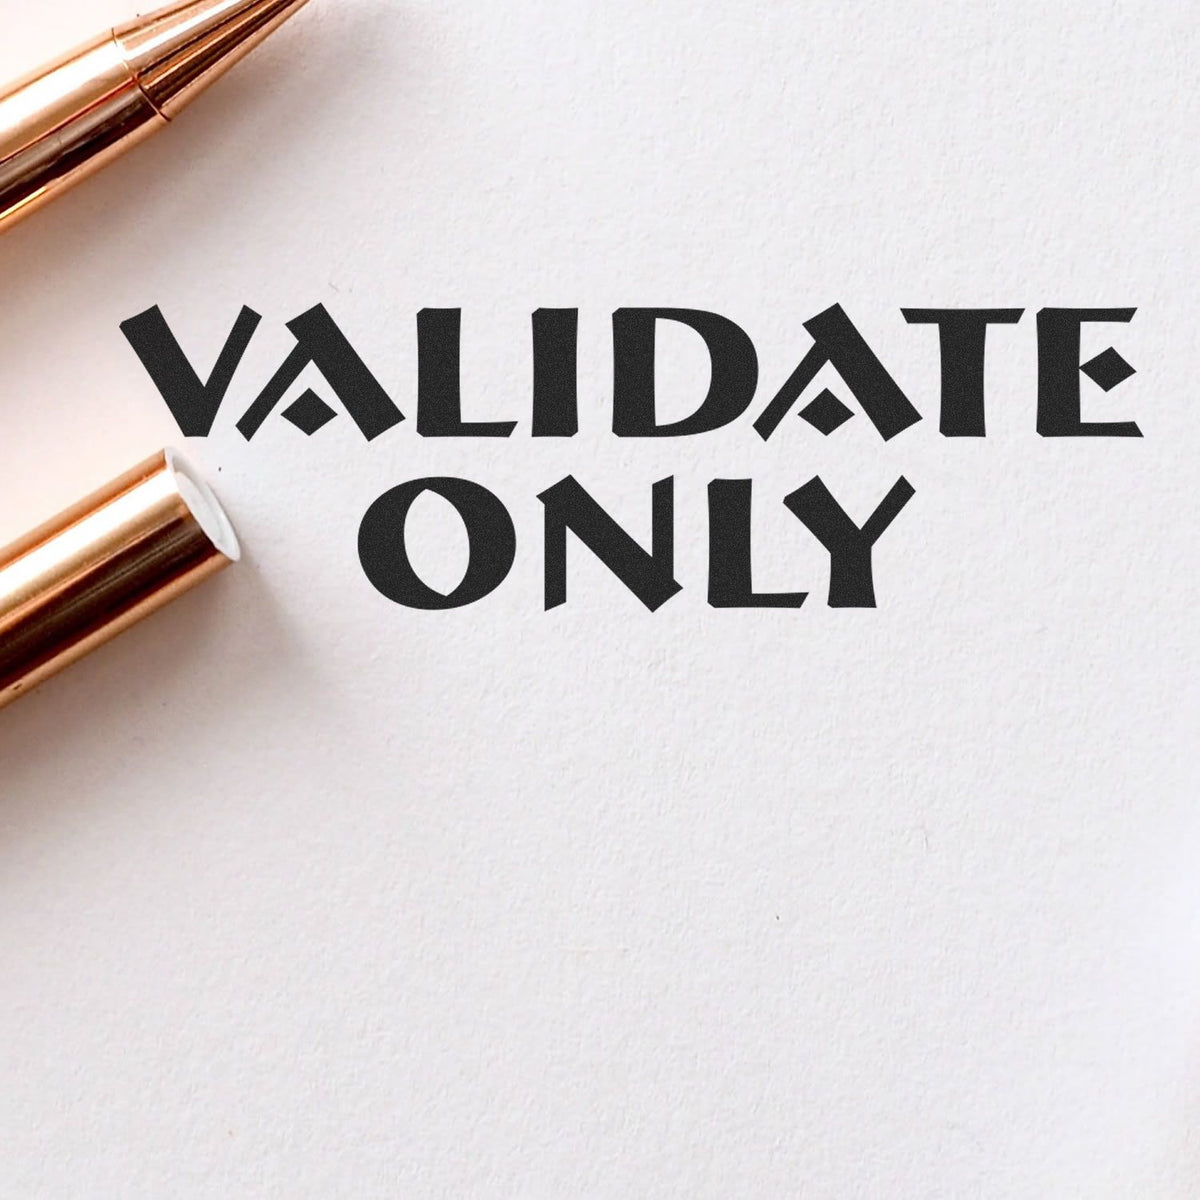 Large Validate Only Rubber Stamp Lifestyle Photo